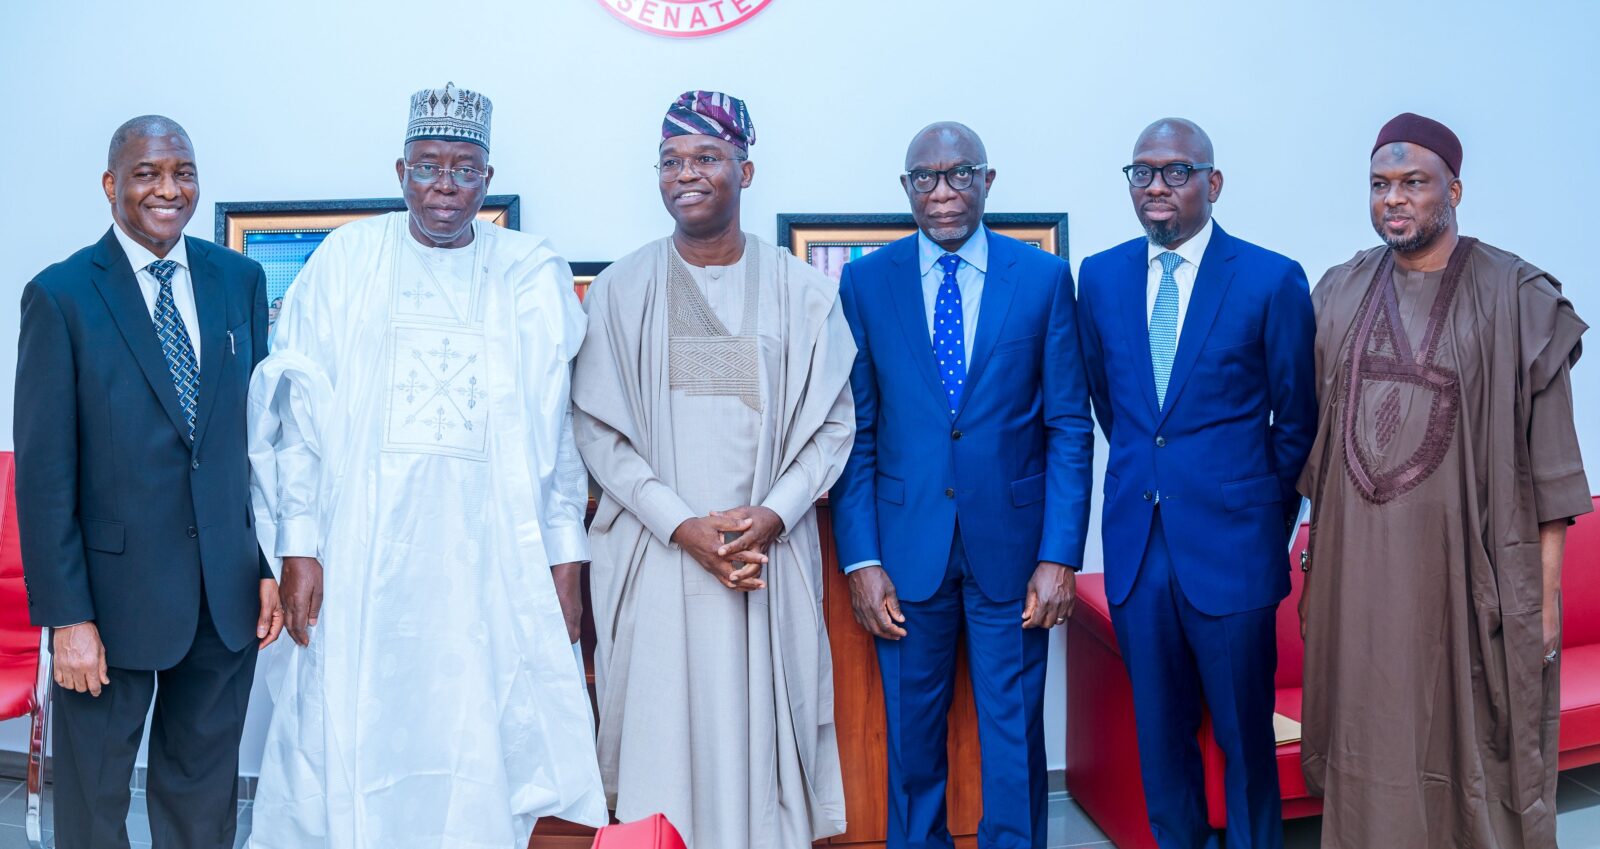 R-L: Dr. Aminu Mukhtar Dan’amu, Executive Director, Asset Management Corporation of Nigeria (AMCON); Mr Adeshola Lamidi, Executive Director AMCON; Mr Gbenga Alade, Managing Director/Chief Executive Officer AMCON; Senator Tokunbo Abiru, Chairman, Senate Committee on Banking, Insurance, and other Financial Institutions; Senator Abdullahi Gumel, Senior Special Assistant to the President on National Assembly Matters, Senate and Mr Lucky Adaghe, Executive Director AMCON after the screening recently at the National Assembly, R-L: Dr. Aminu Mukhtar Dan’amu, Executive Director, Asset Management Corporation of Nigeria (AMCON); Mr Adeshola Lamidi, Executive Director AMCON; Mr Gbenga Alade, Managing Director/Chief Executive Officer AMCON; Senator Tokunbo Abiru, Chairman, Senate Committee on Banking, Insurance, and other Financial Institutions; Senator Abdullahi Gumel, Senior Special Assistant to the President on National Assembly Matters, Senate and Mr Lucky Adaghe, Executive Director AMCON after the screening recently at the National Assembly, Abuja